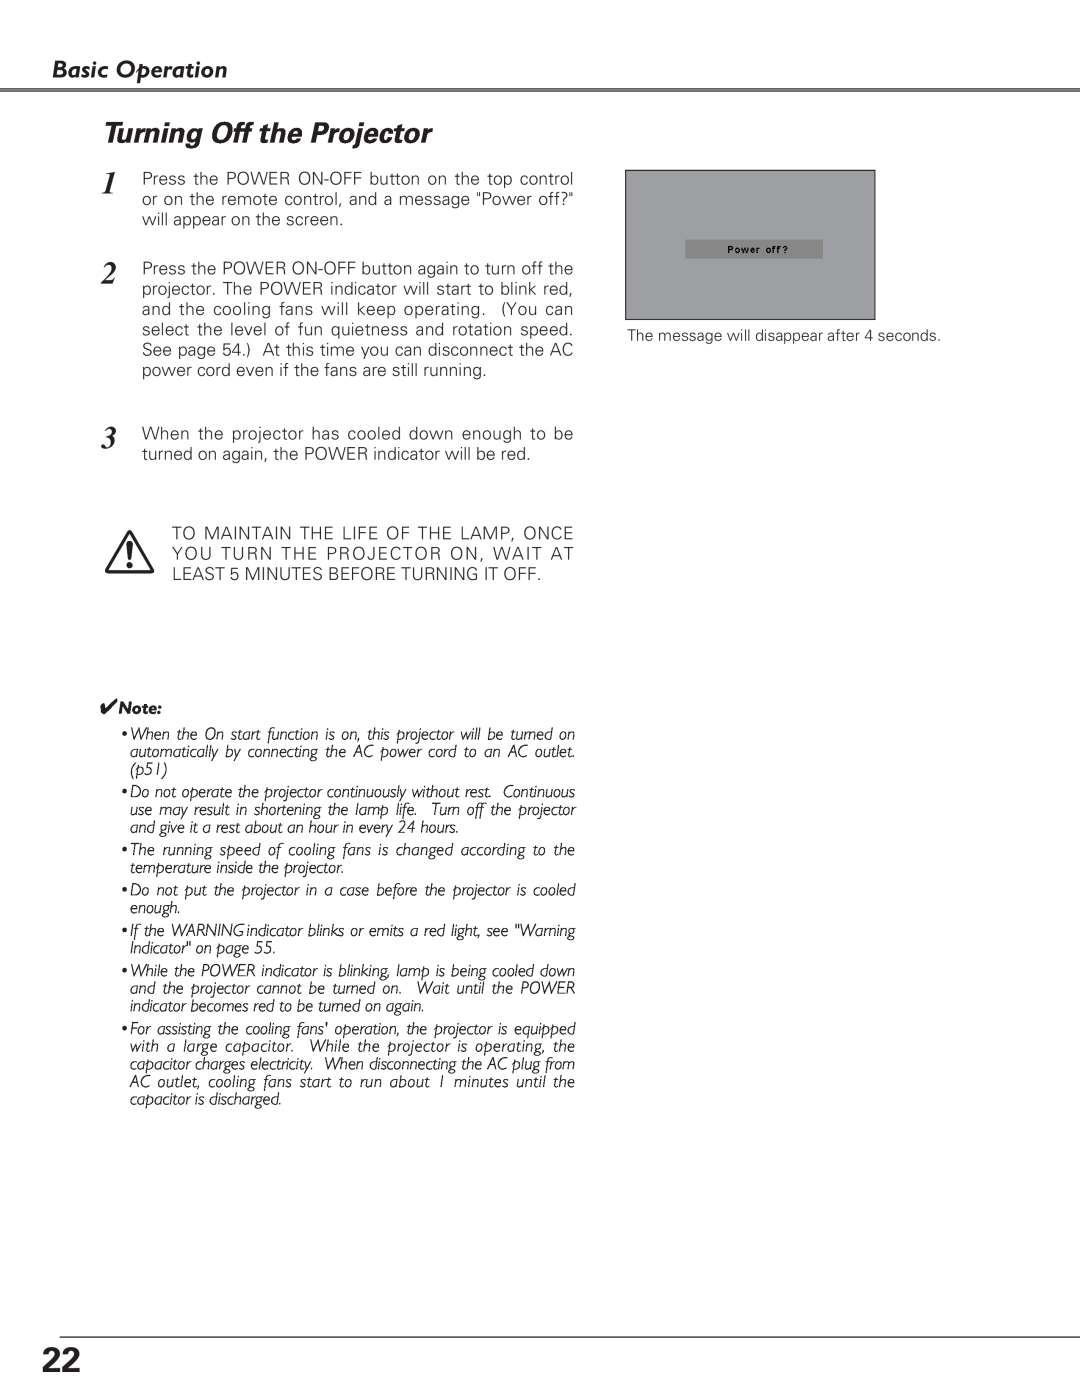 Eiki LC-XB27 owner manual Turning Off the Projector, Basic Operation 